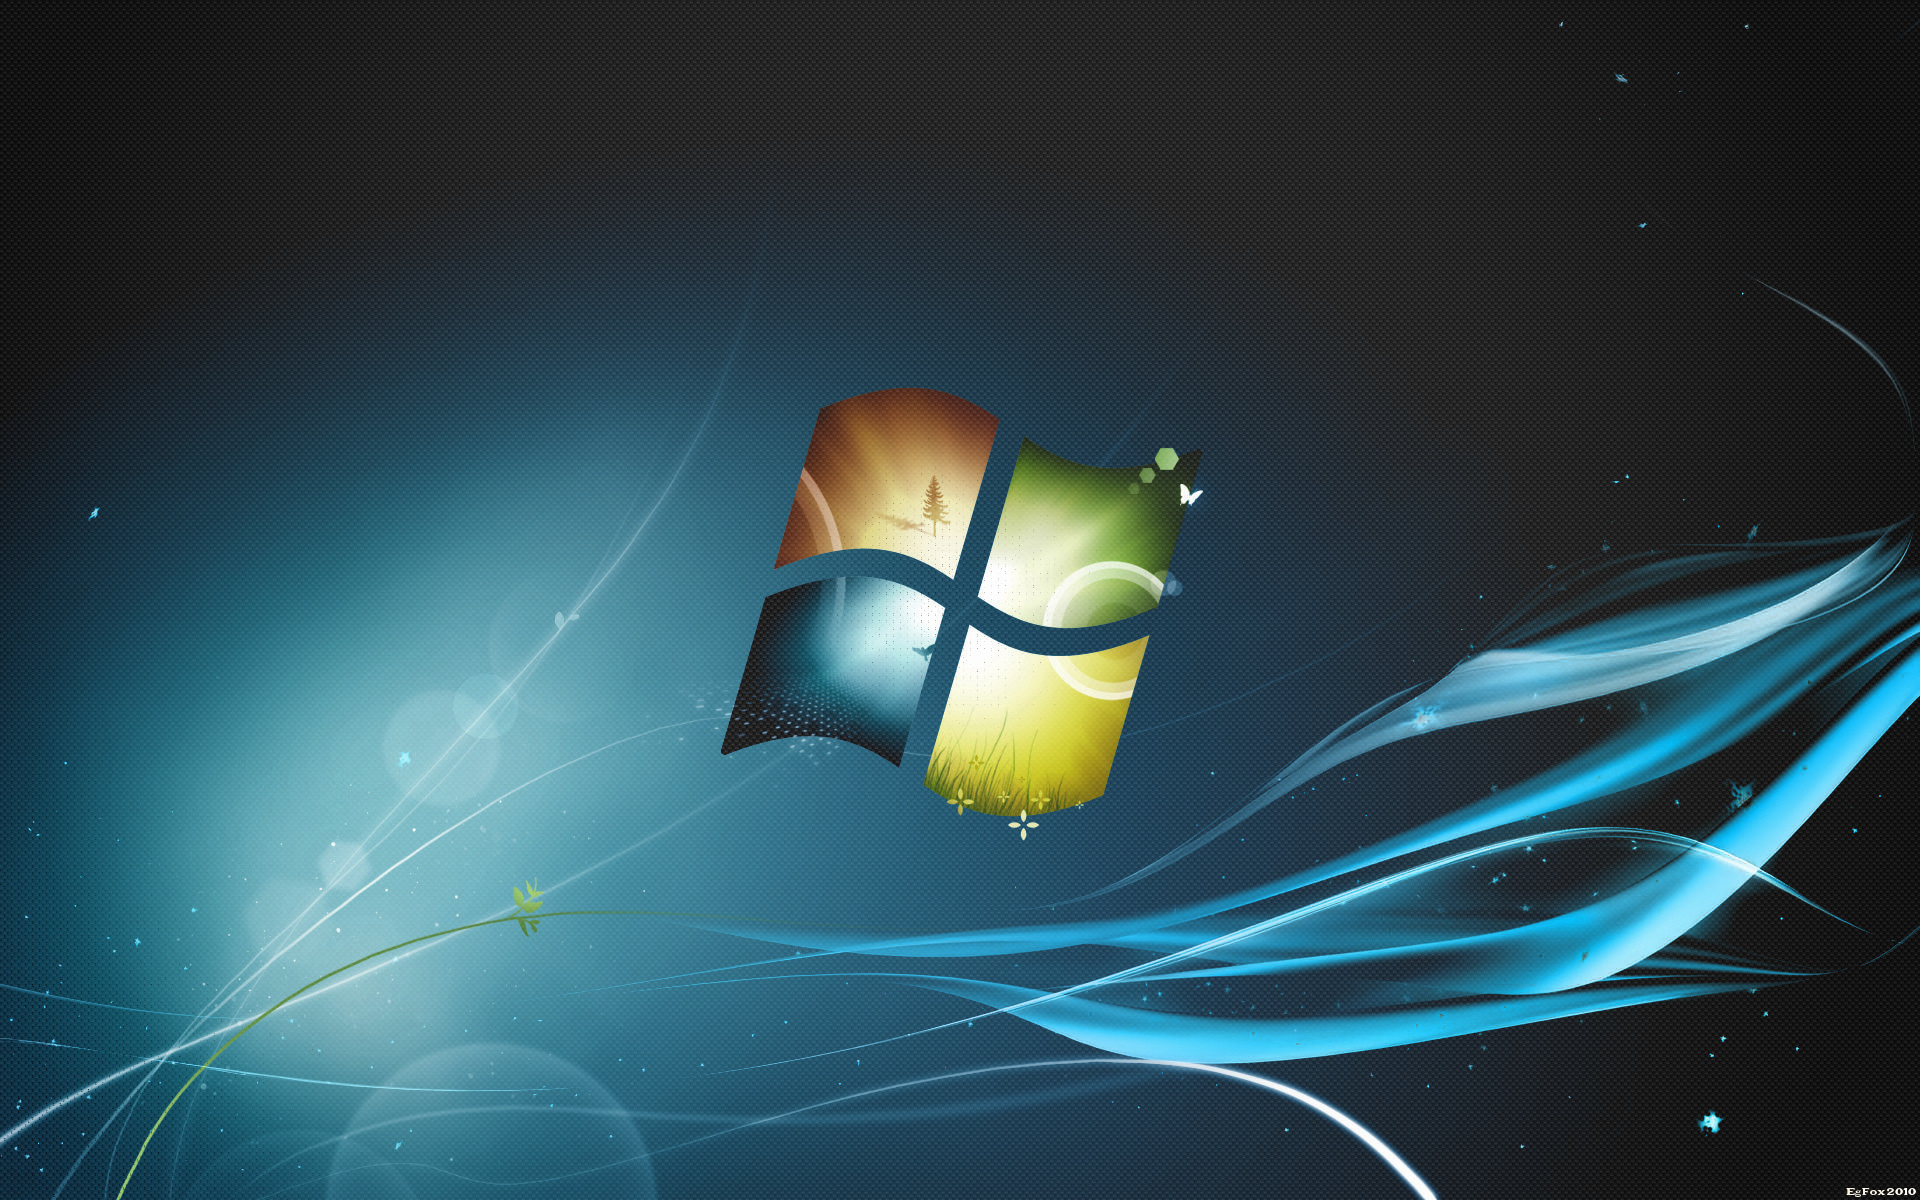 Free download backgrounds hd wallpapers windows 7 backgrounds hd